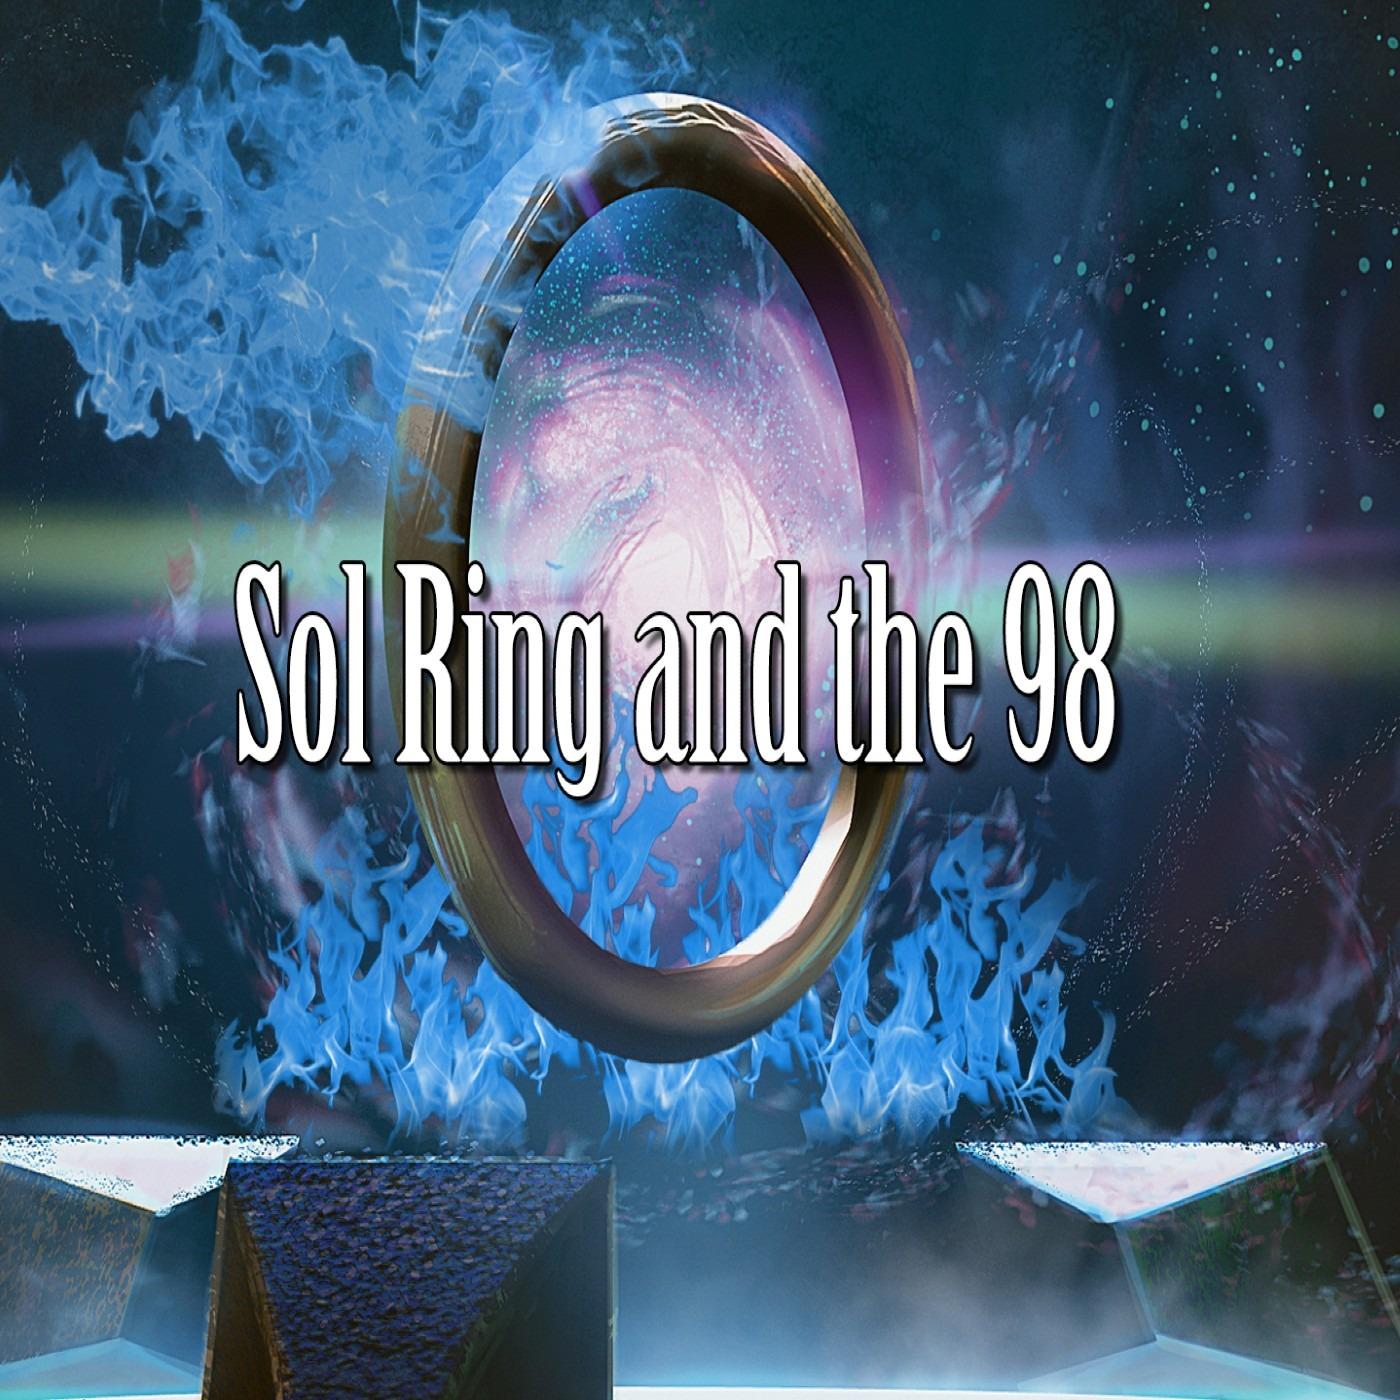 Sol Ring and the 98